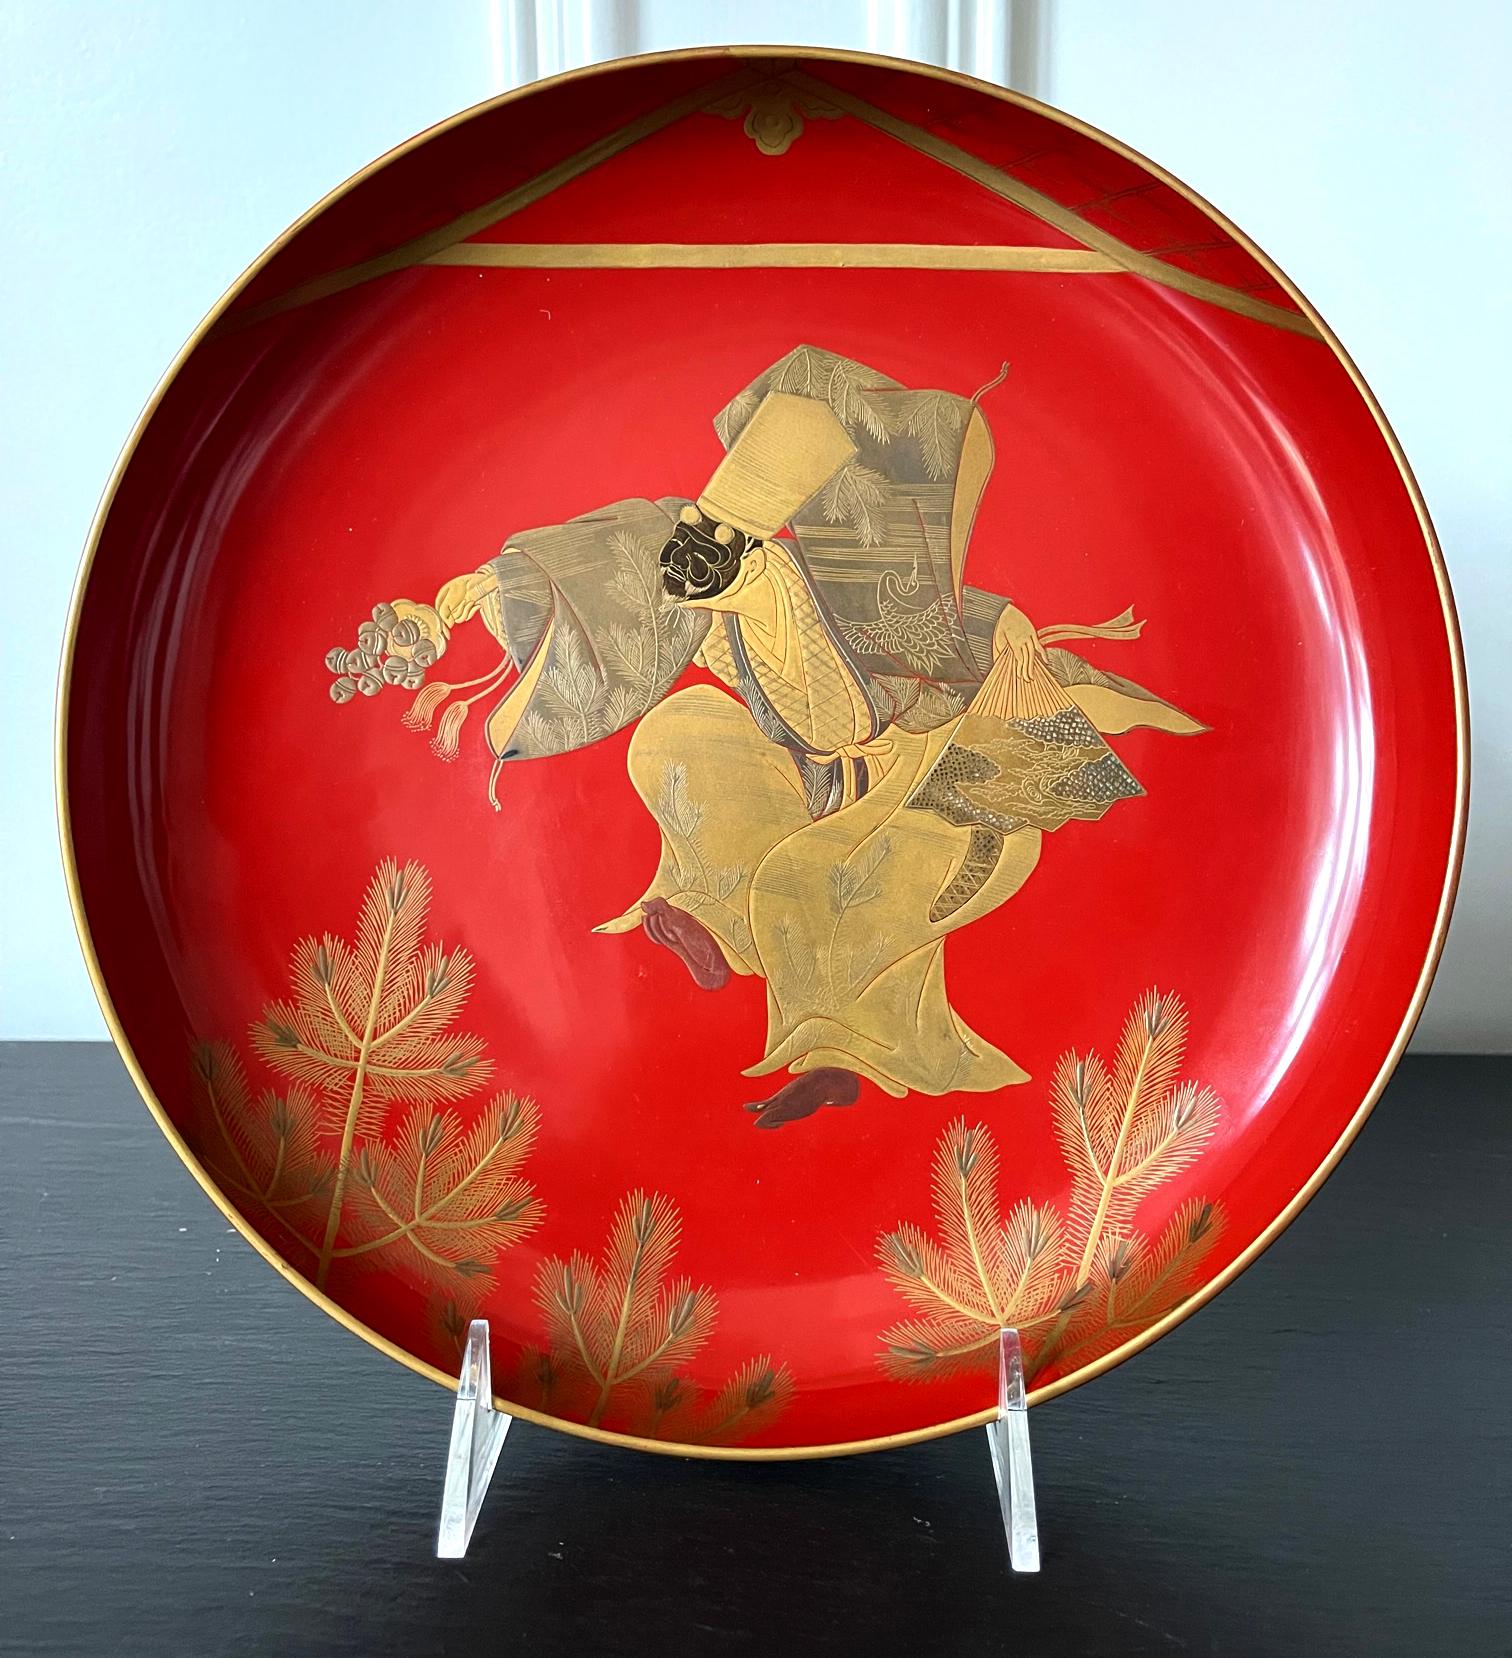 A large circular plate with a short stem base in Vermillion lacquer color from Late Meiji Period circa end of 19th century to early 20th century. The surface was decorated with a fine maki-e picture that depicts a masked dancer in motion. The figure